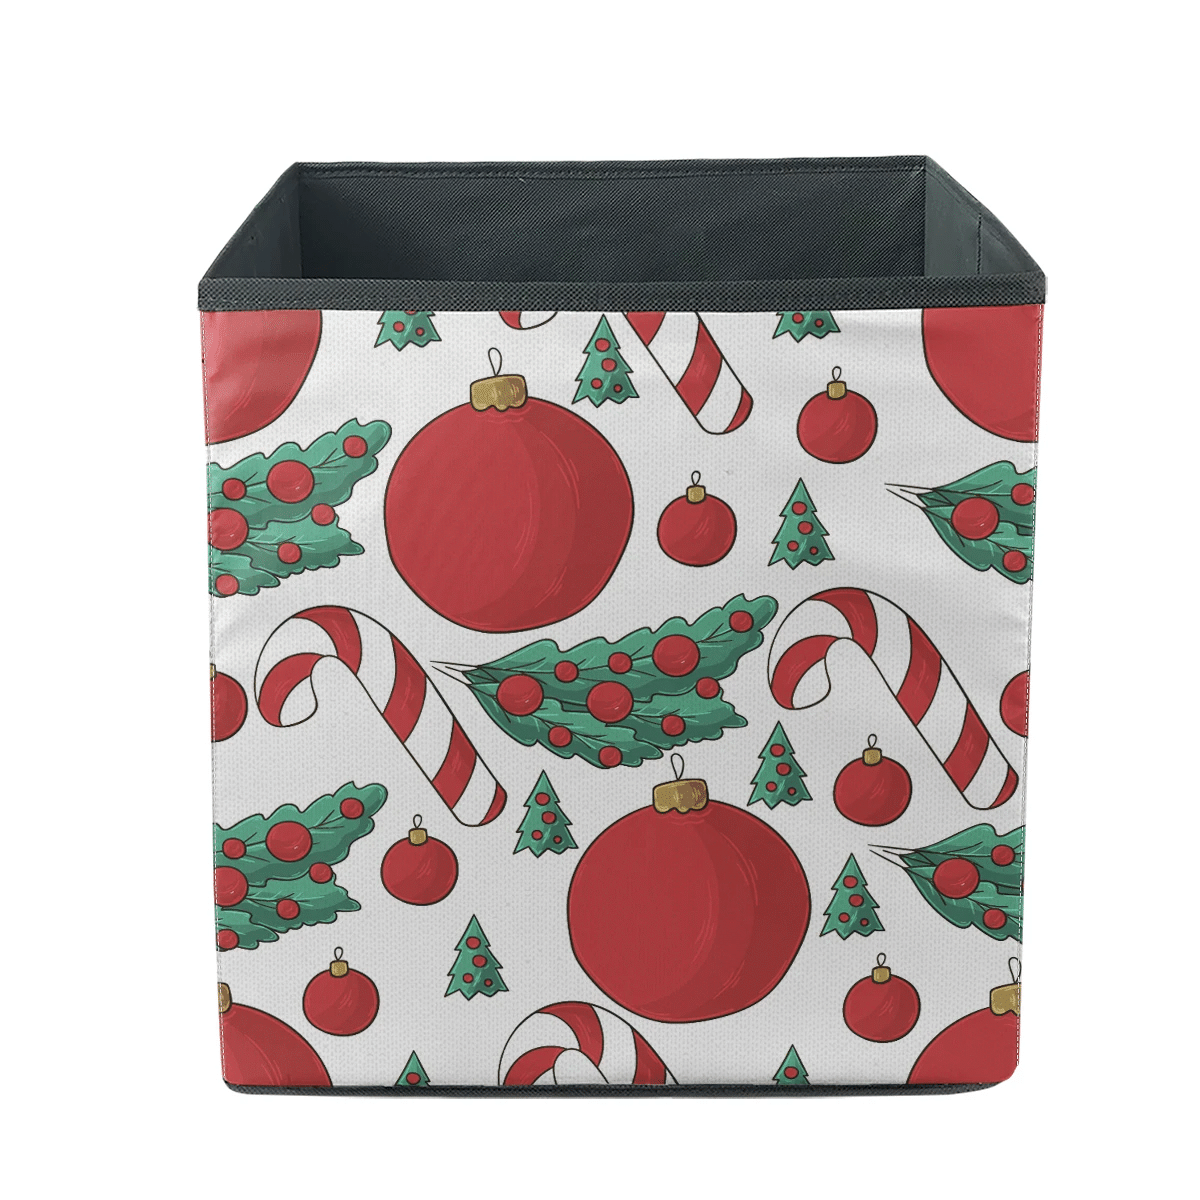 Christmas Candy Cane And Red Light Ball Storage Bin Storage Cube